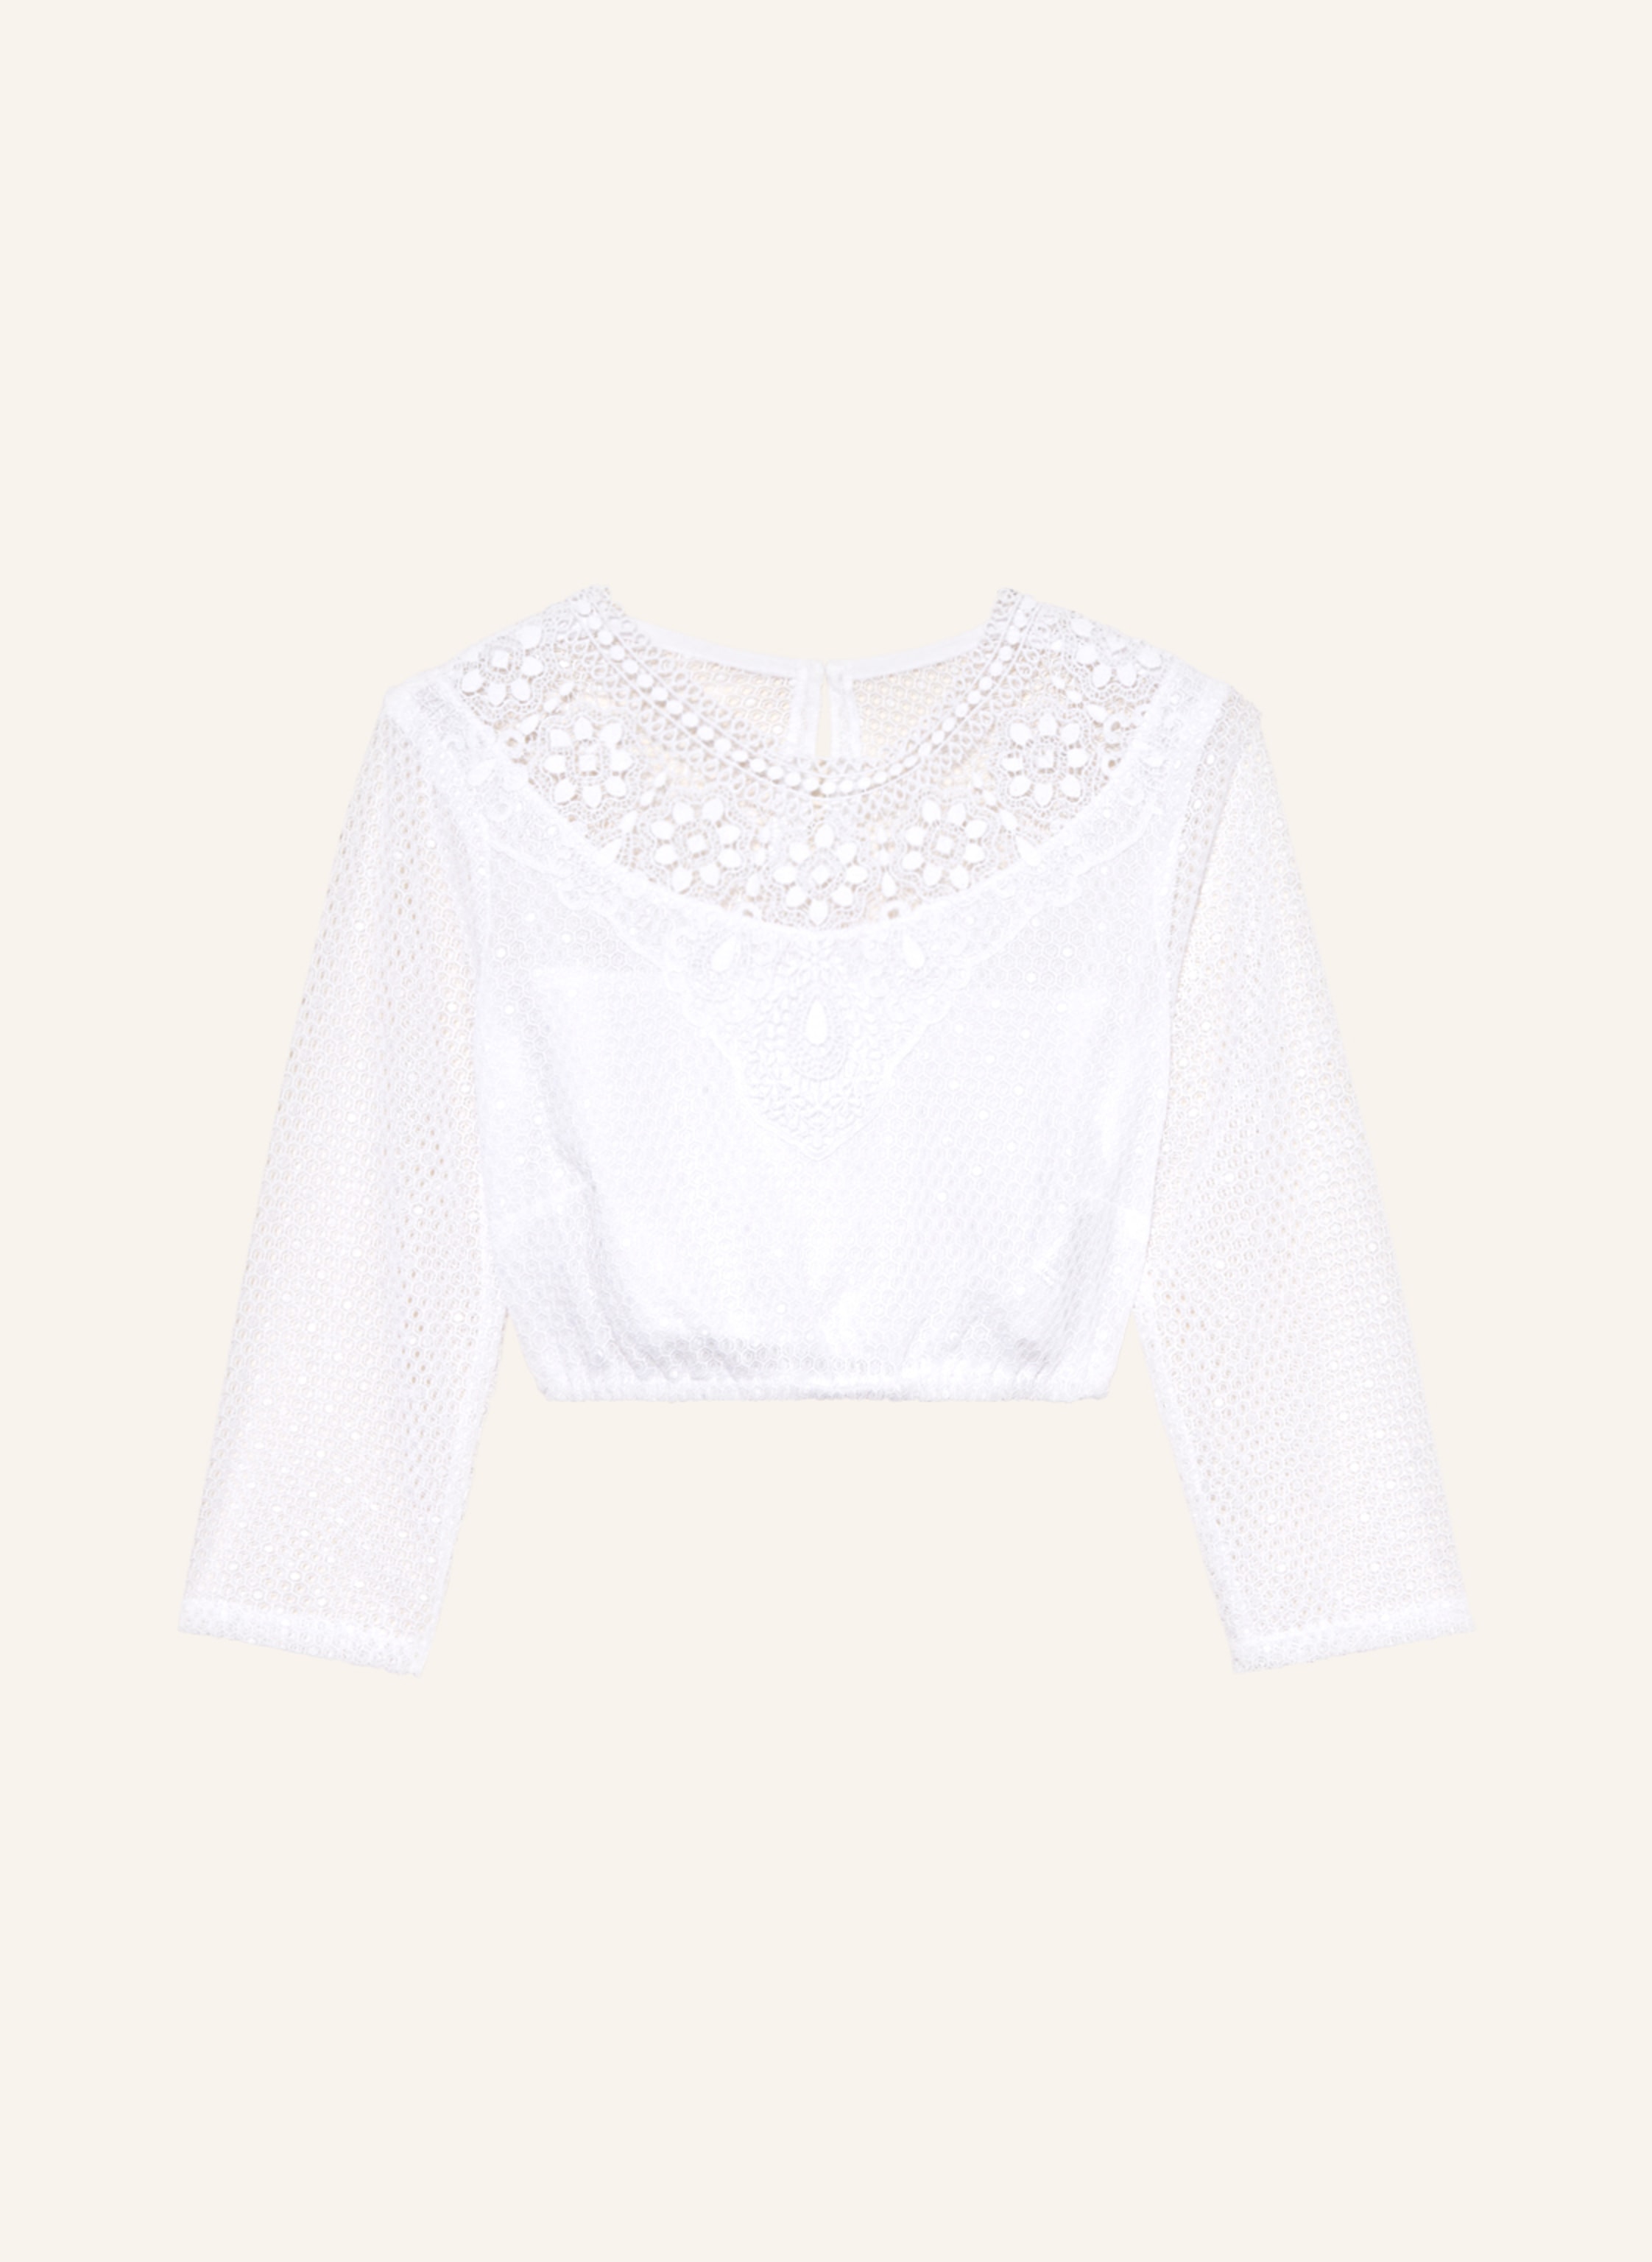 WALDORFF Dirndl blouse made of crochet lace in white